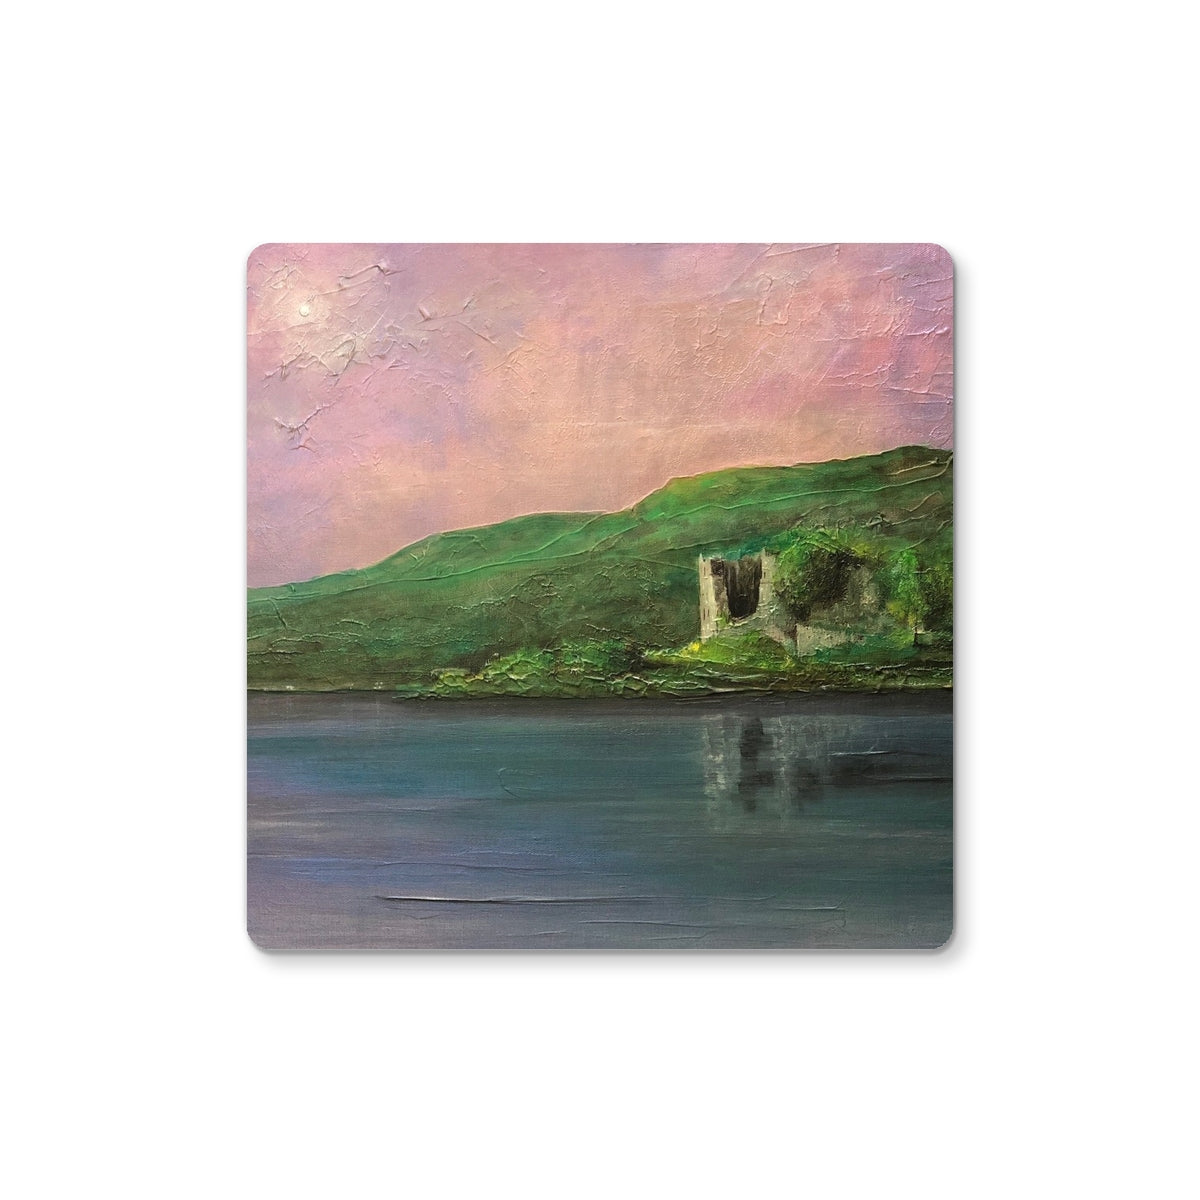 Old Castle Lachlan Art Gifts Coaster-Homeware-Prodigi-Single Coaster-Paintings, Prints, Homeware, Art Gifts From Scotland By Scottish Artist Kevin Hunter